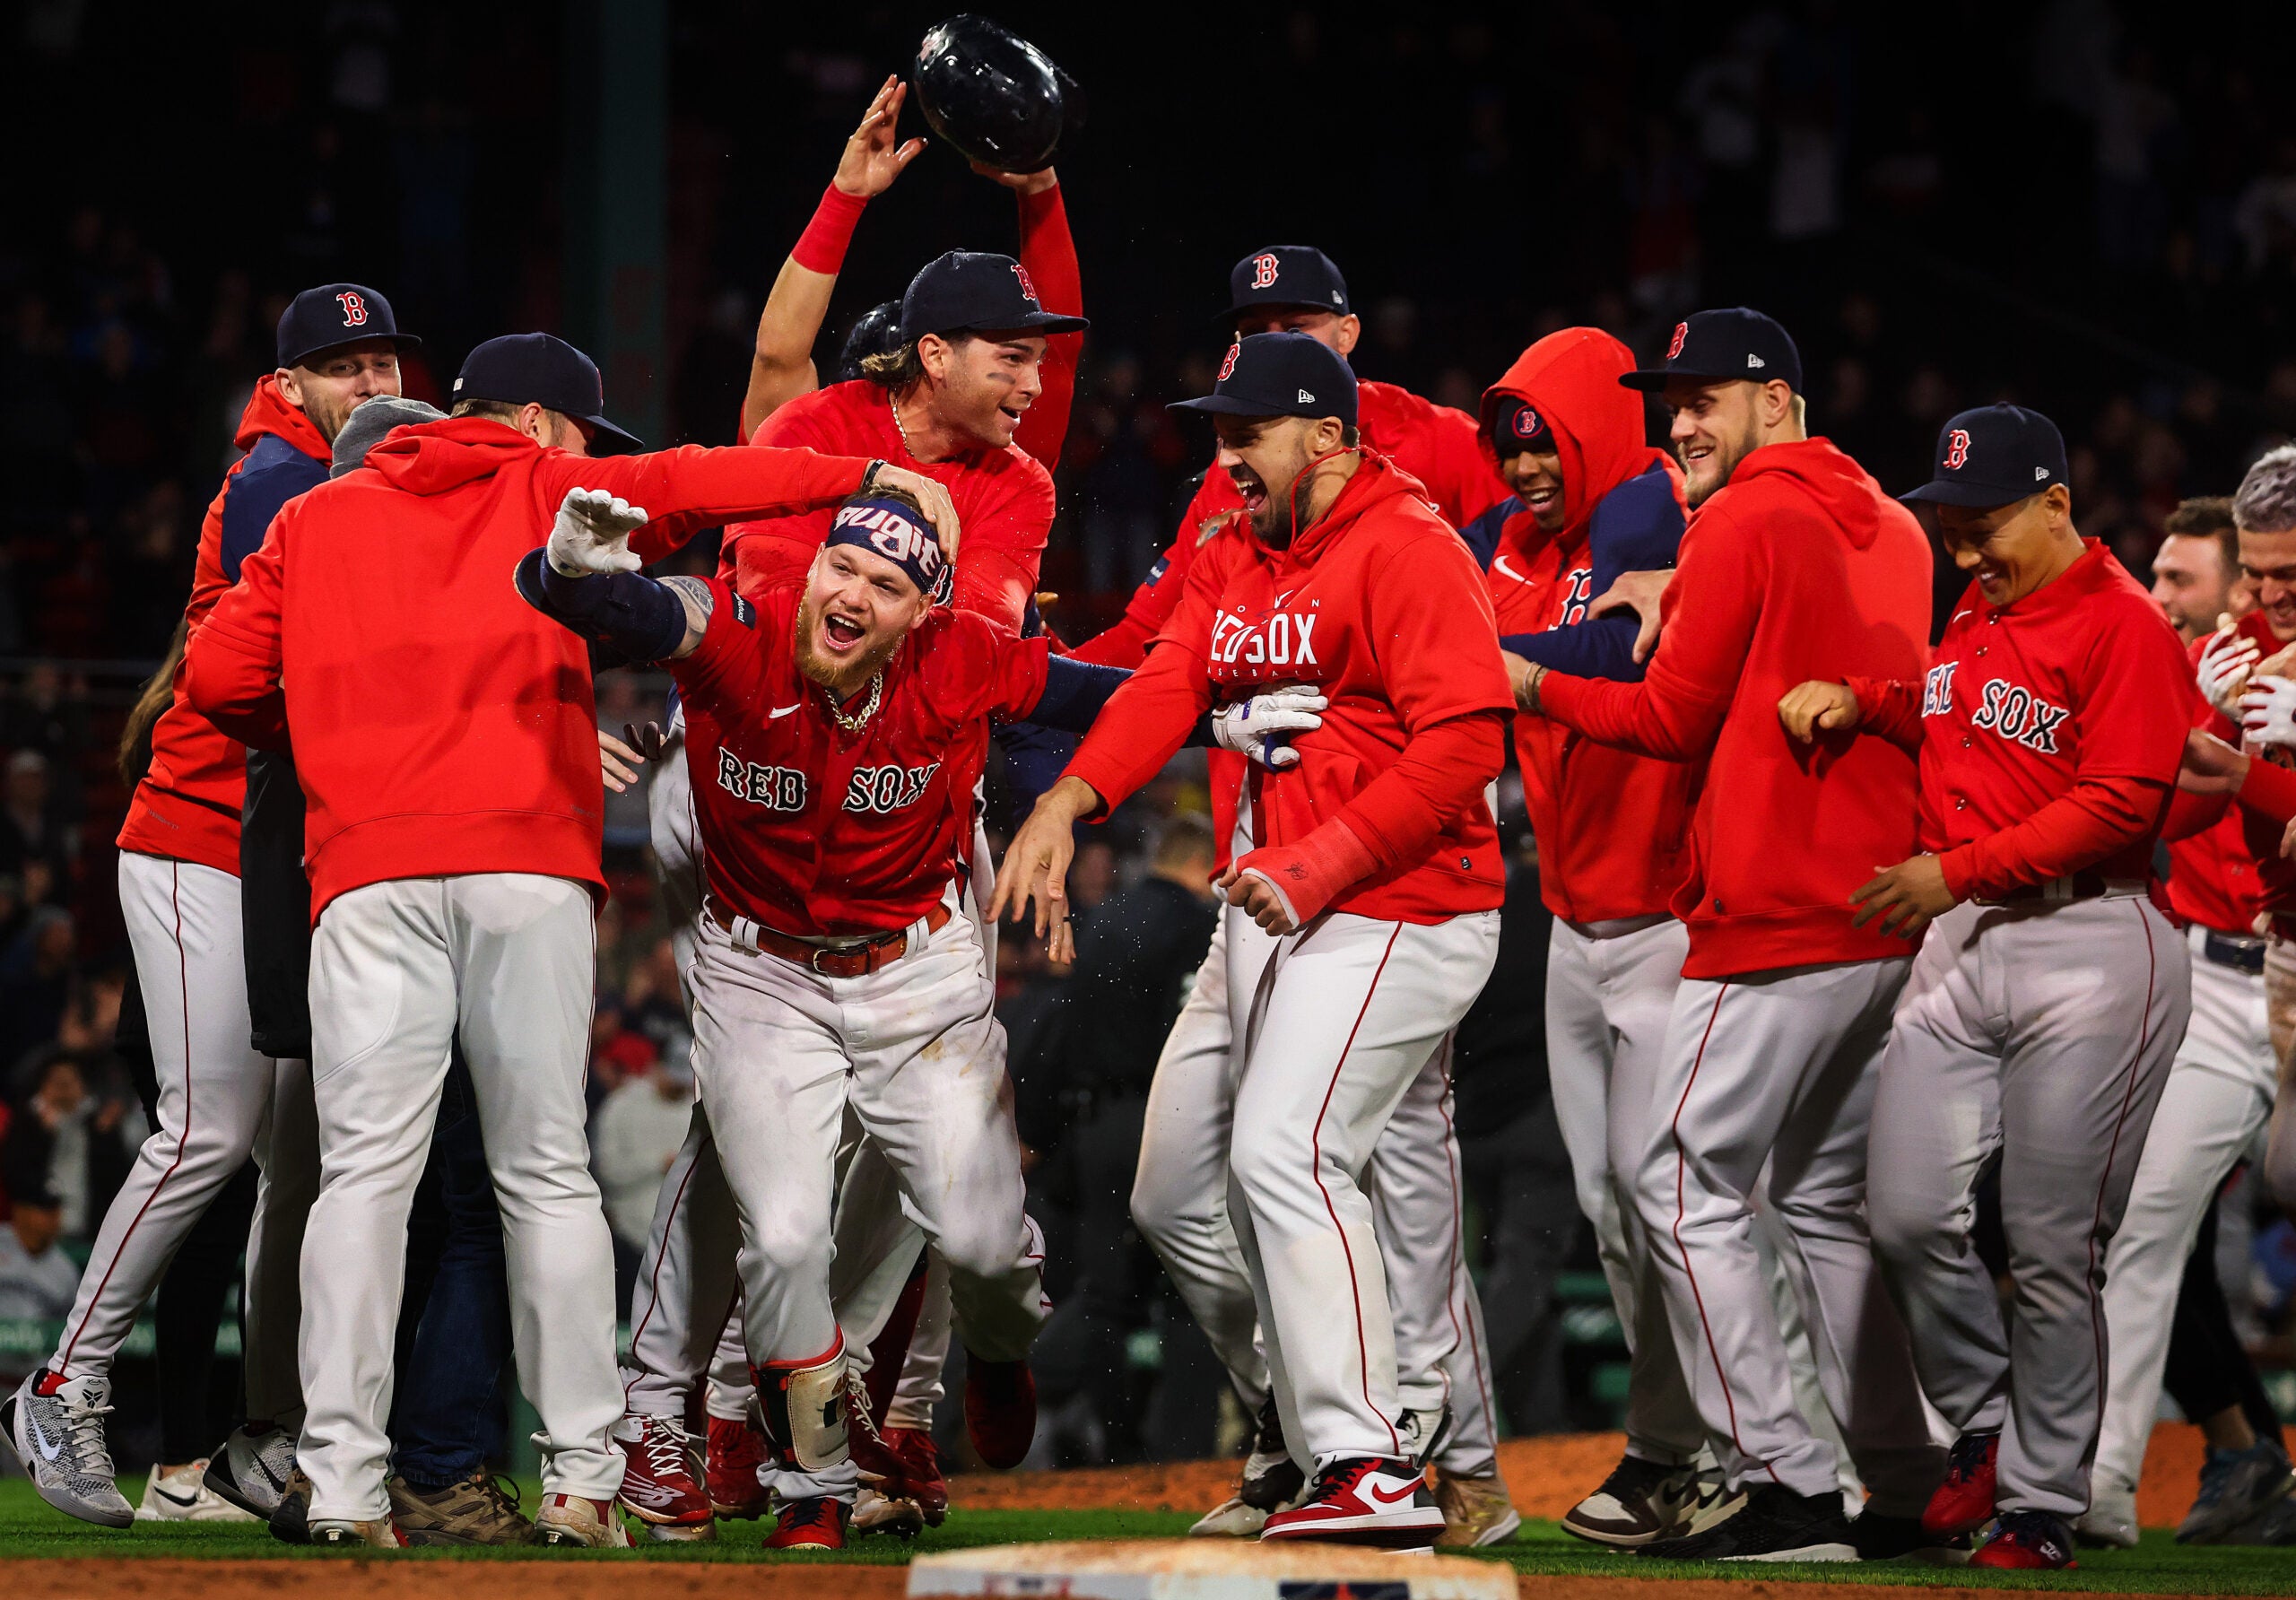 Boston Red Sox right fielder Alex Verdugo (99) and teammates celebrate after his game winning walkoff single in the tenth inning was ruled a fair ball after review. The Boston Red Sox host the Minnesota Twins on April 18, 2023 at Fenway Park in Boston, MA.